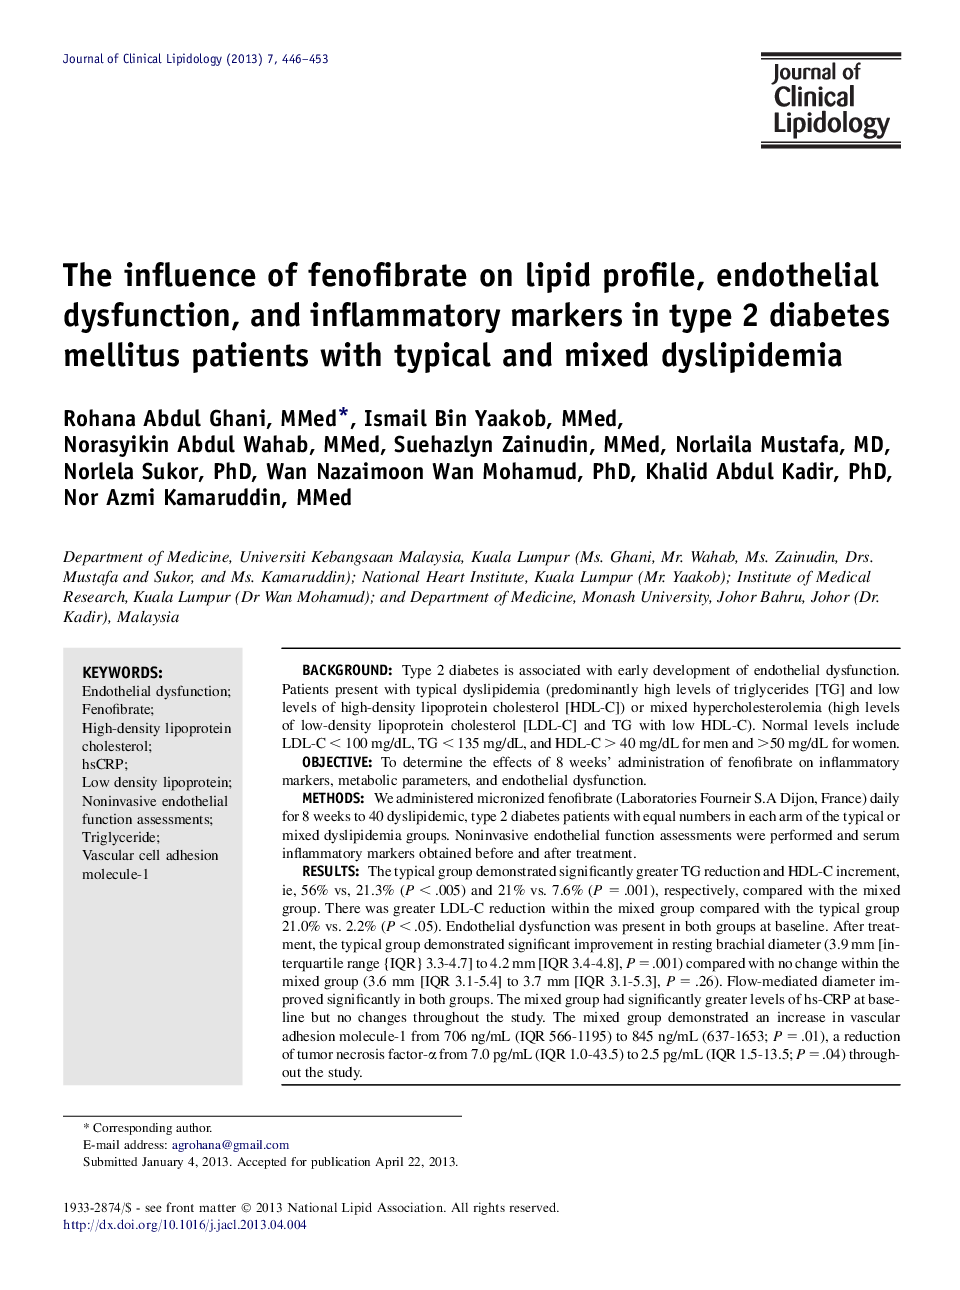 The influence of fenofibrate on lipid profile, endothelial dysfunction, and inflammatory markers in type 2 diabetes mellitus patients with typical and mixed dyslipidemia